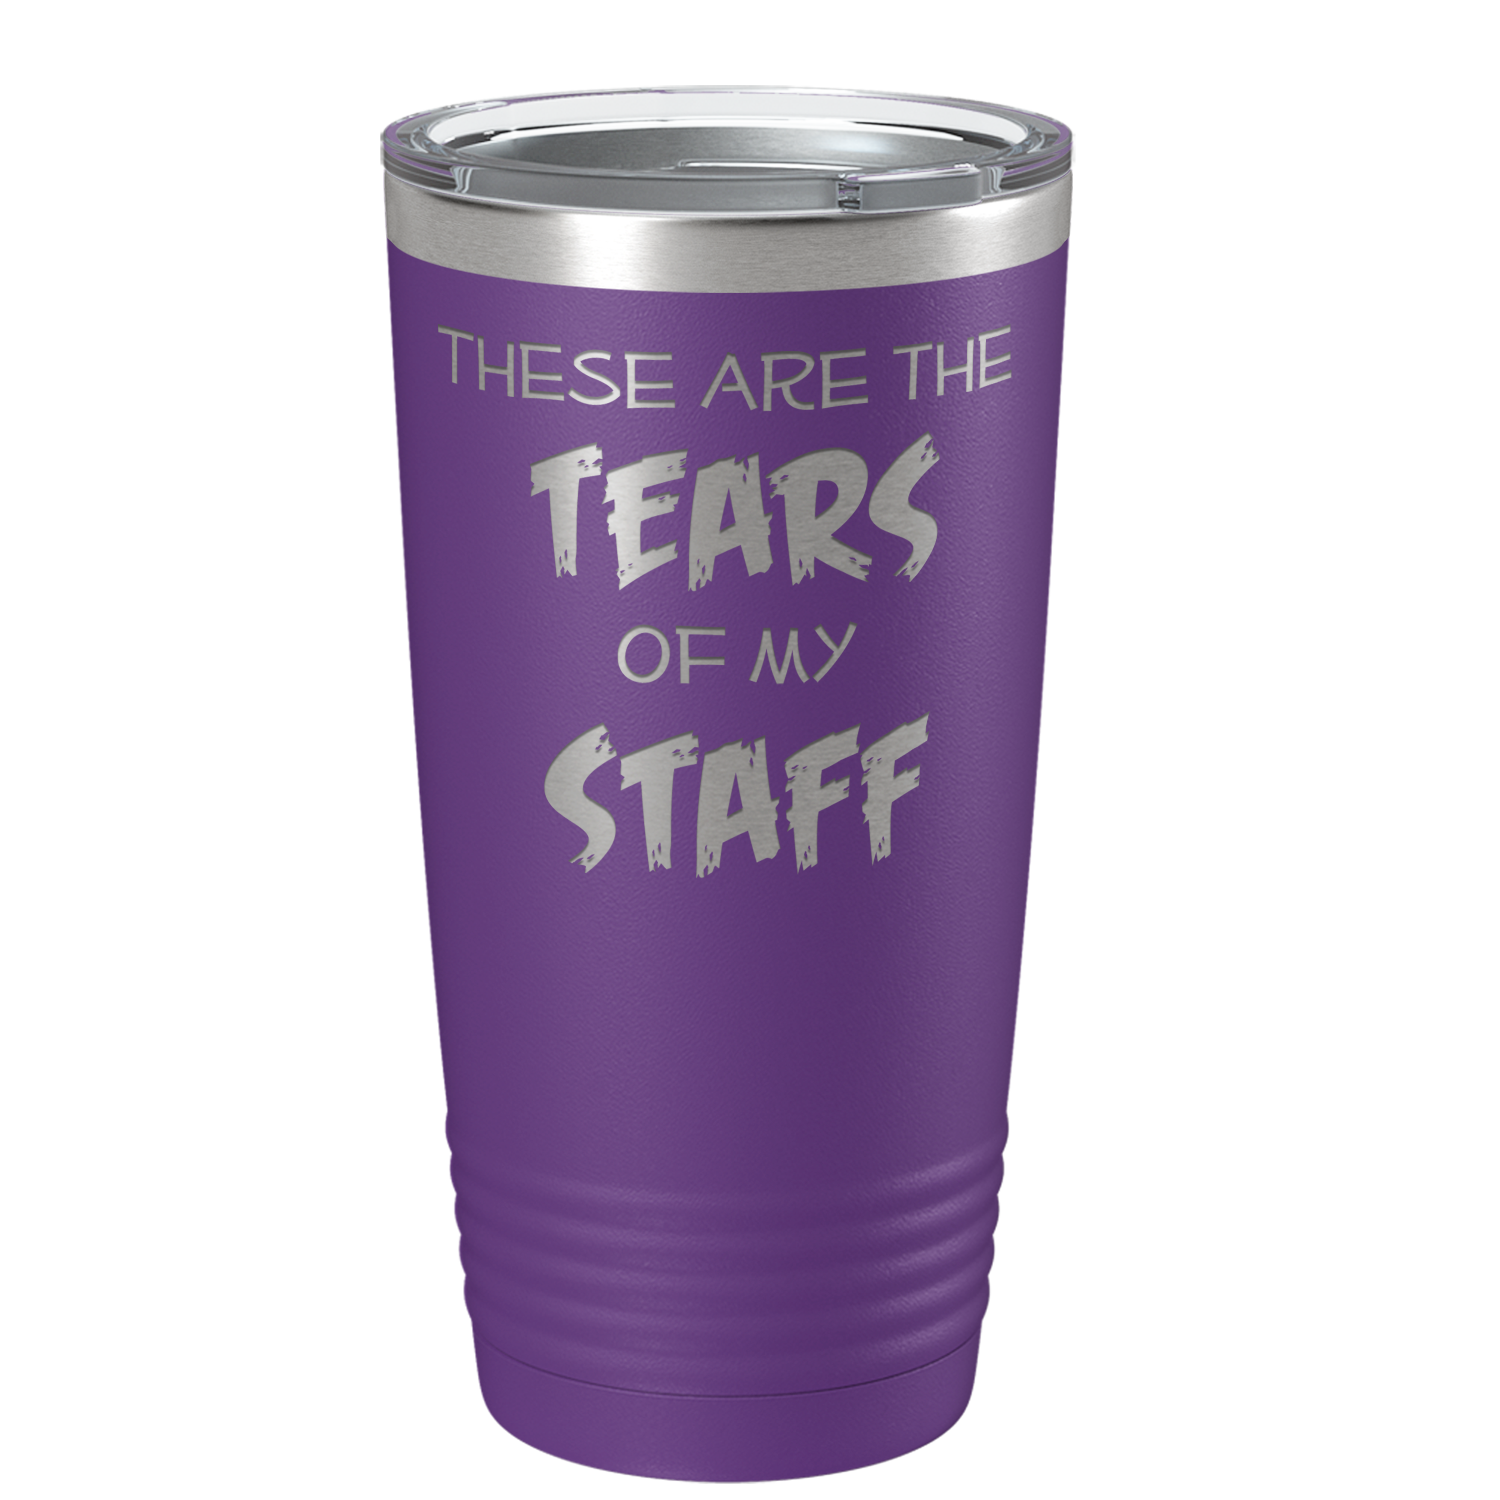 These are Tears of my Staff on Purple 20 oz Stainless Steel Ringneck Tumbler